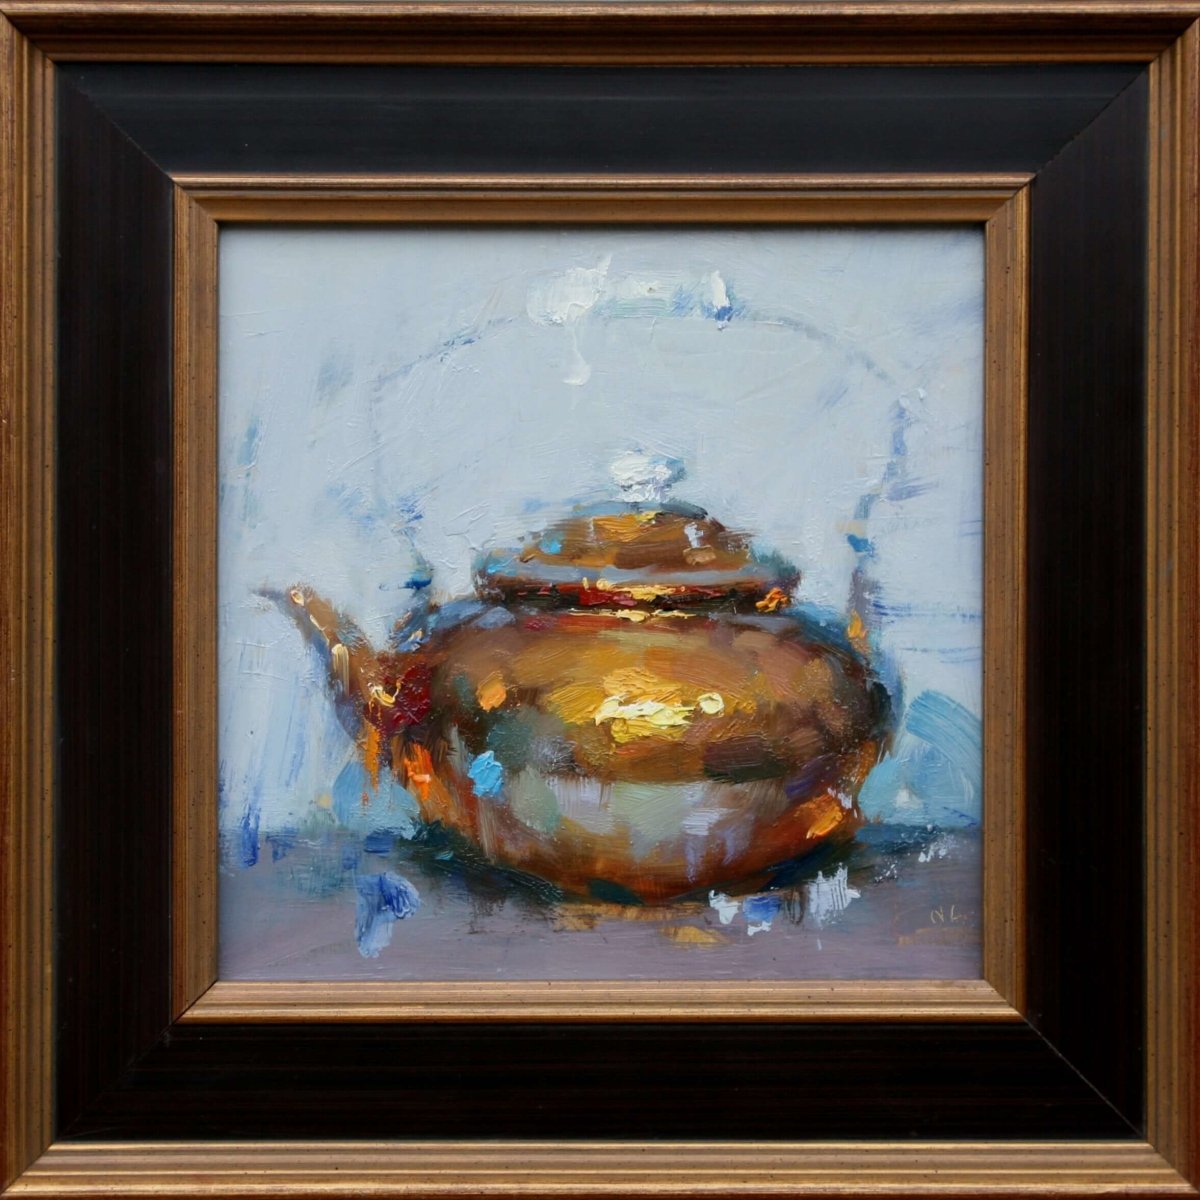 Copper Pot by Ning Lee at LePrince Galleries